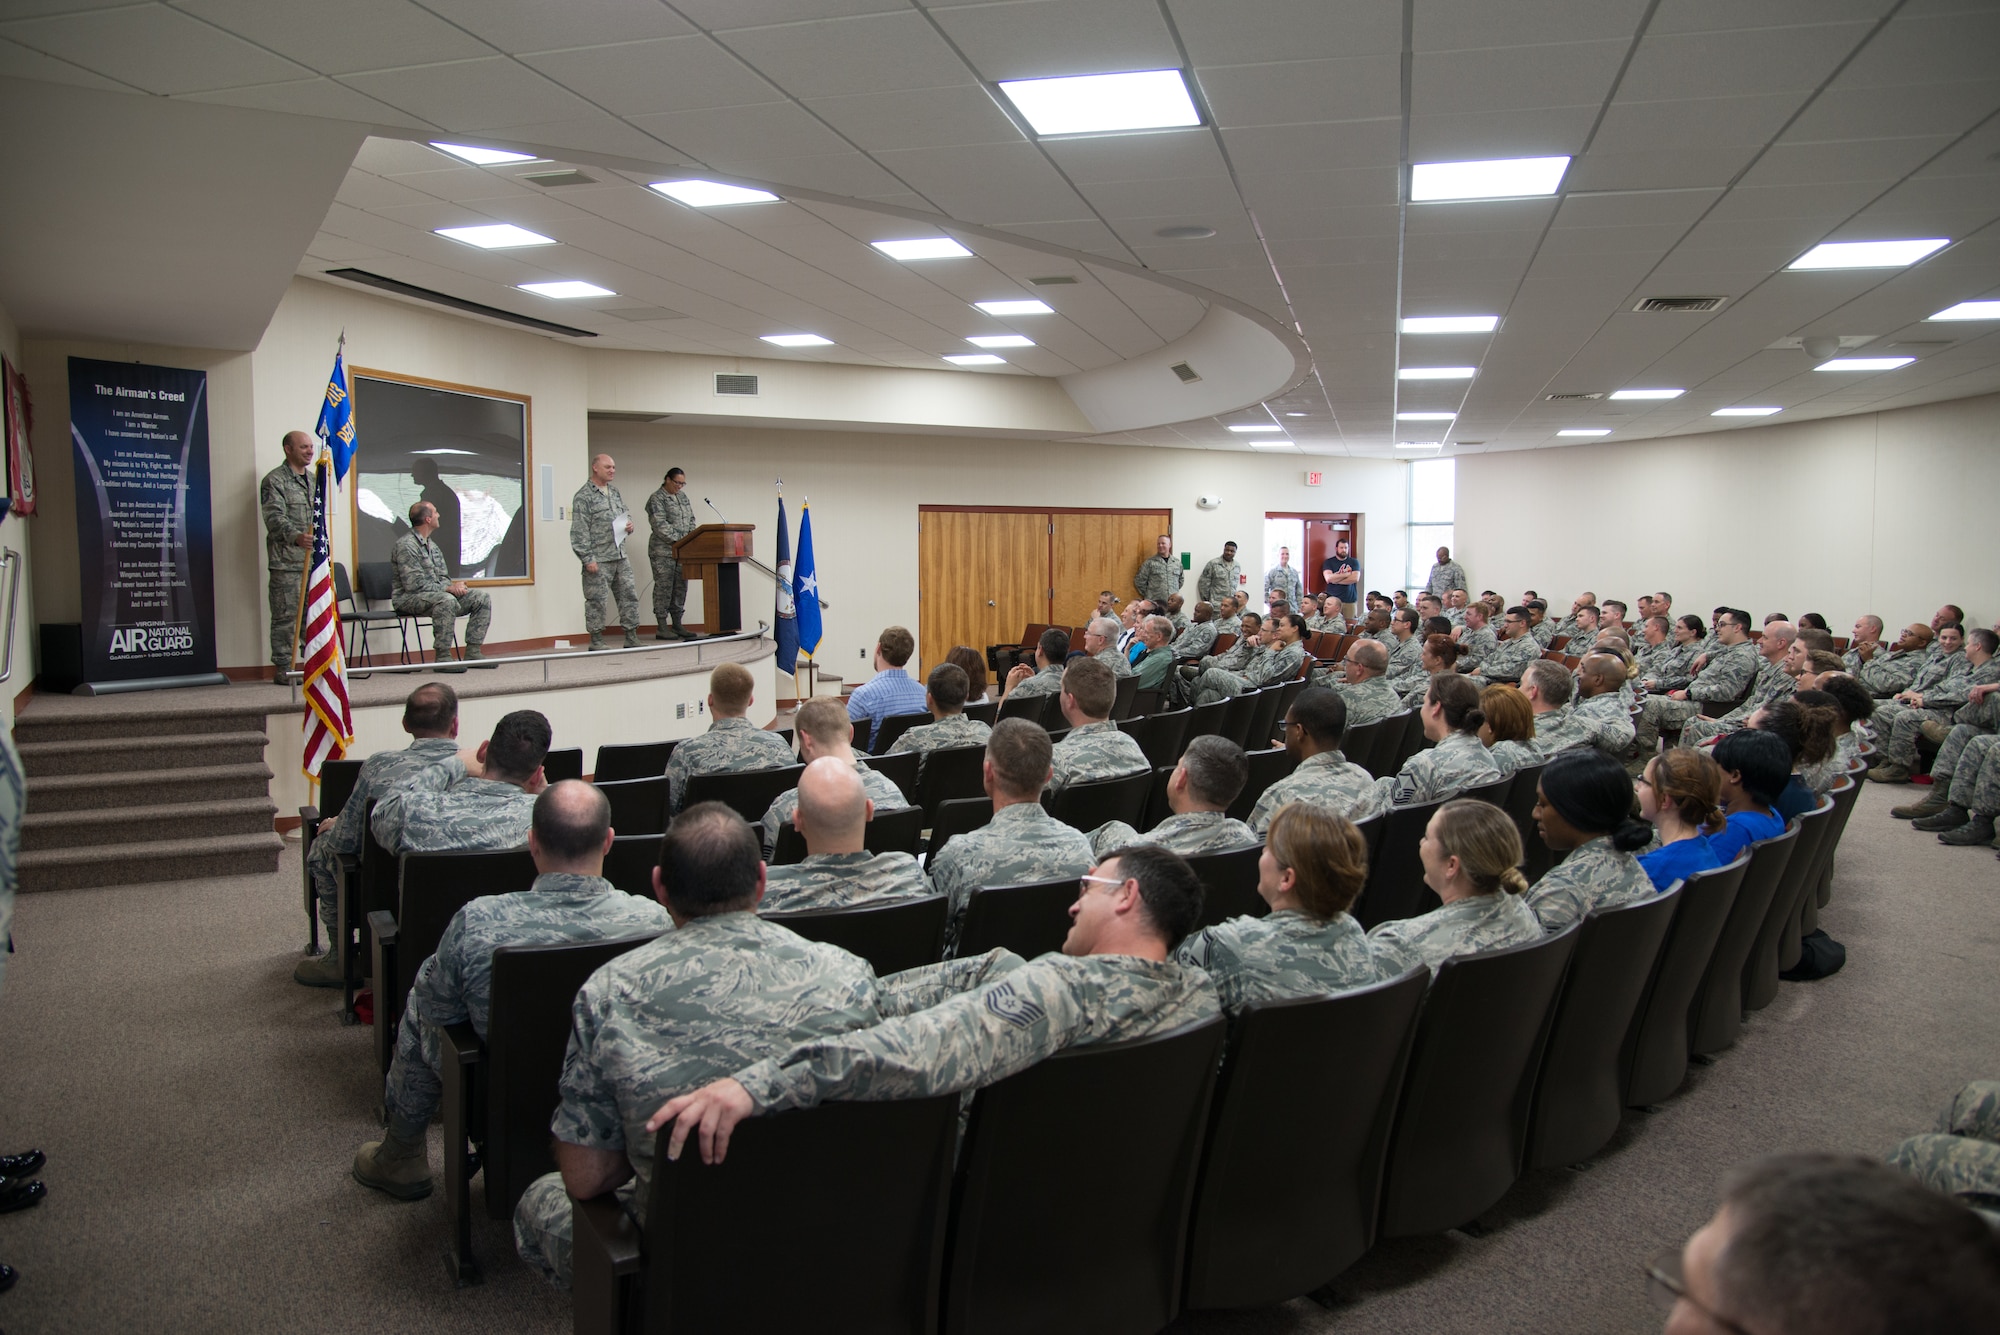 203rd RED HORSE welcomes new commander